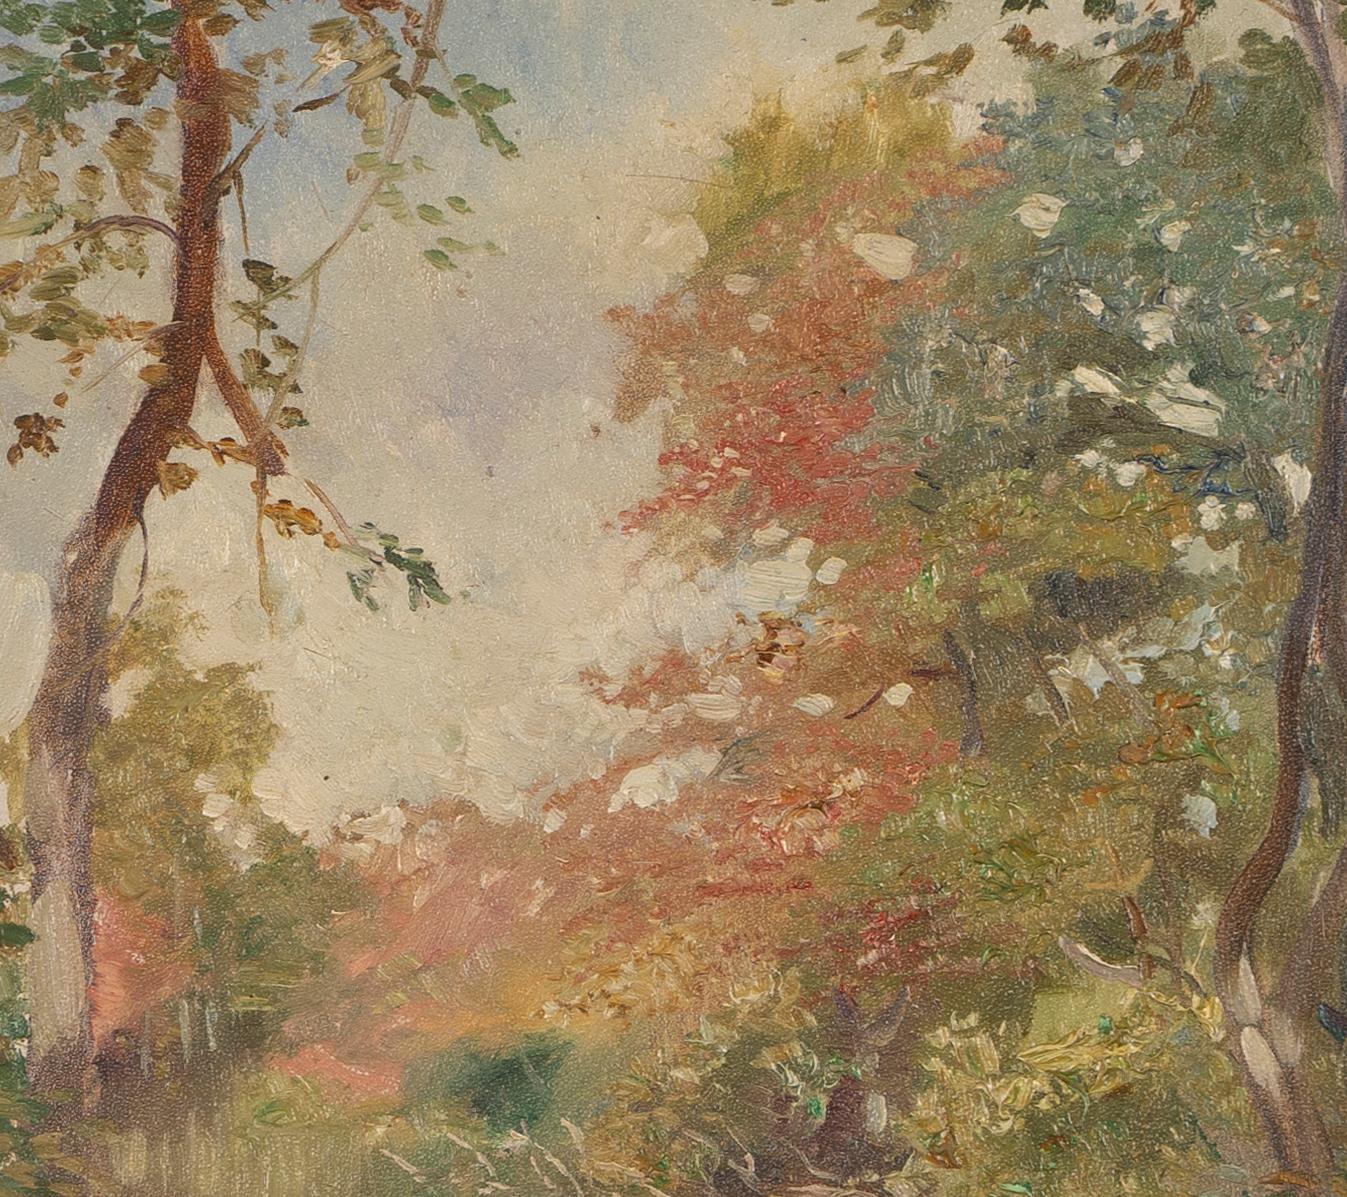 Antique American impressionist landscape oil painting by Edward S Annison.  Oil on board, circa 1910.  Signed.  Image size, 8L x 12H.  Housed in a period  frame.